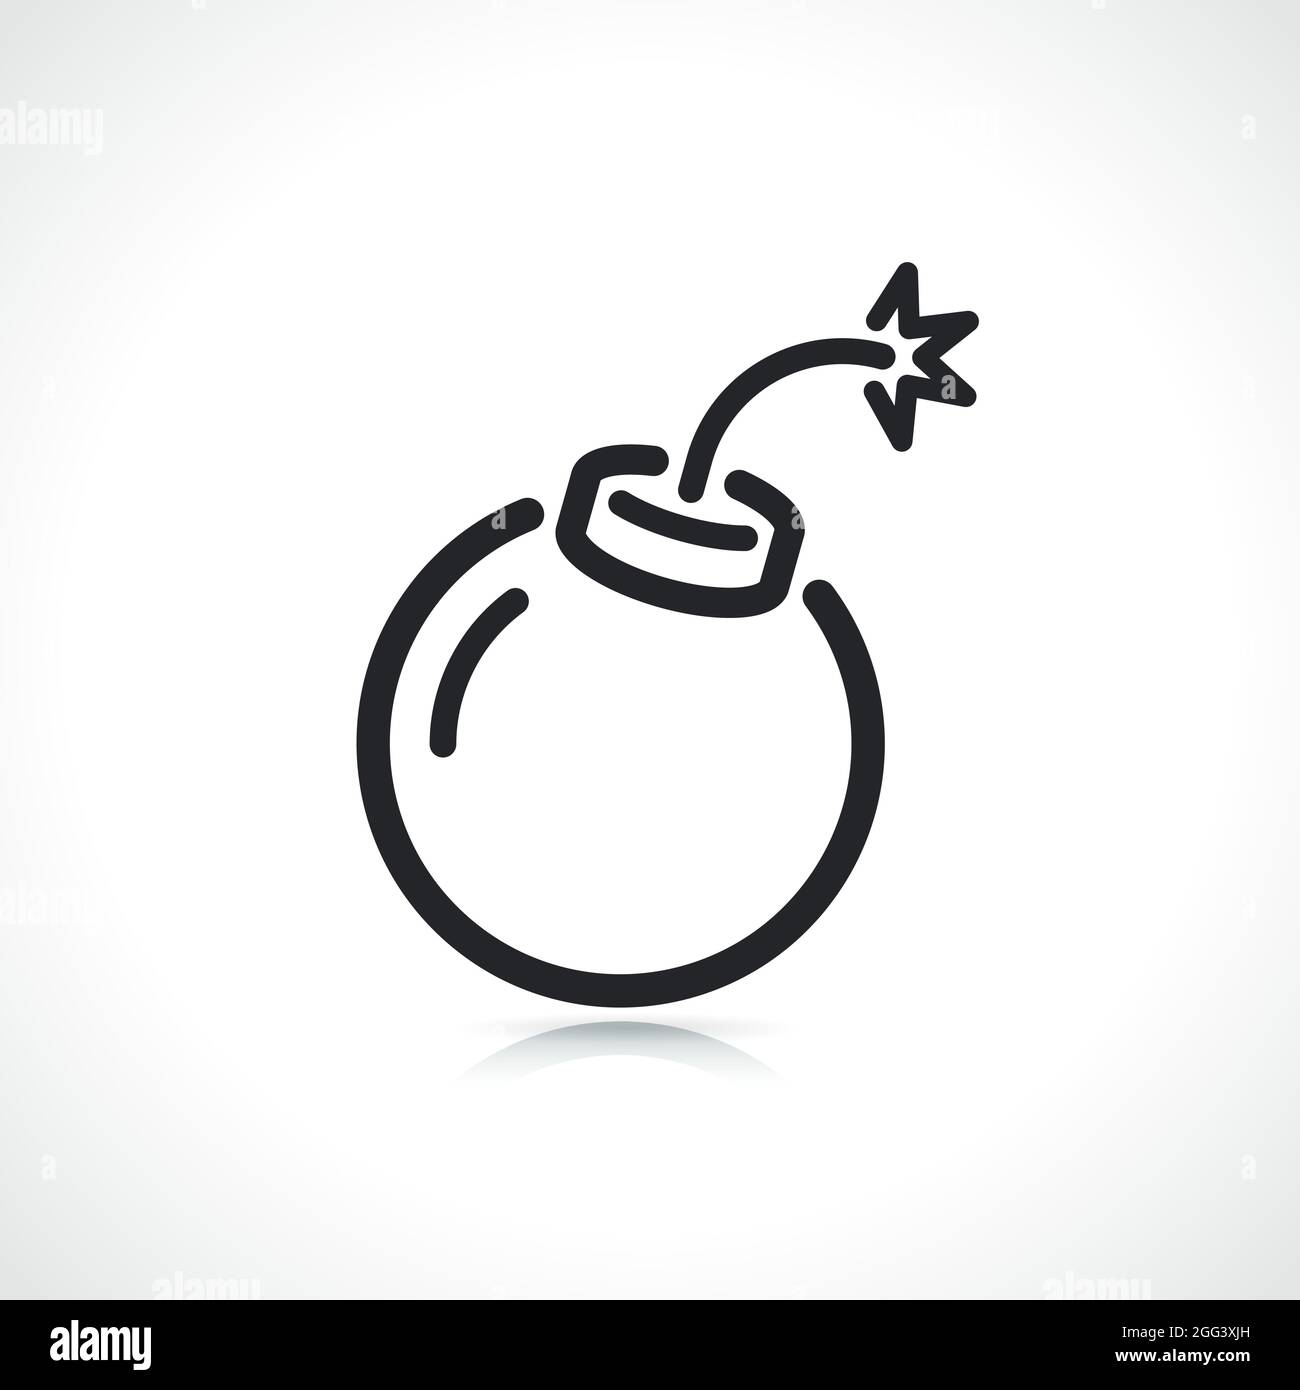 bomb thin line icon black and white Stock Vector